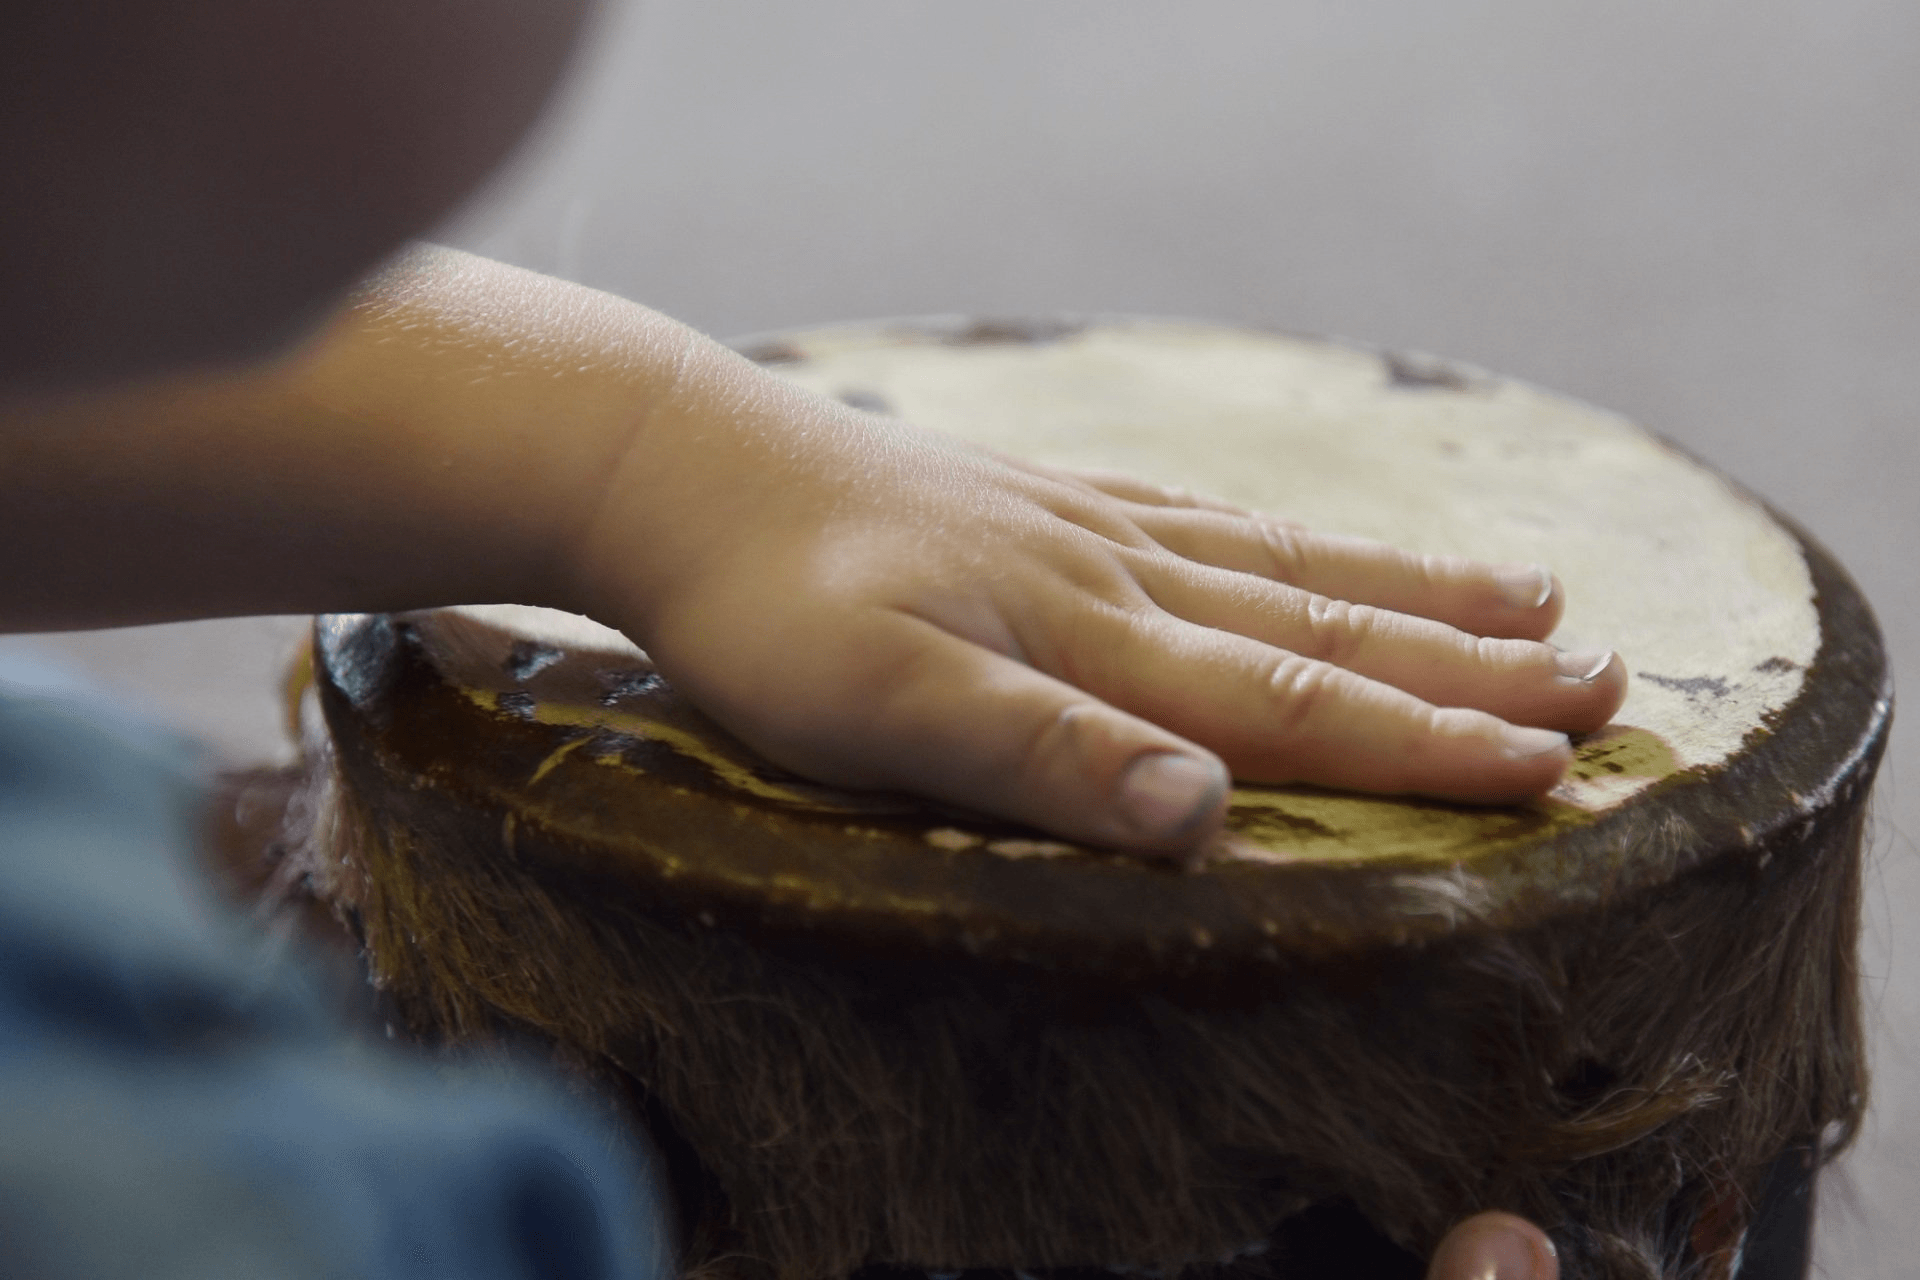 music being played on a bongo drum